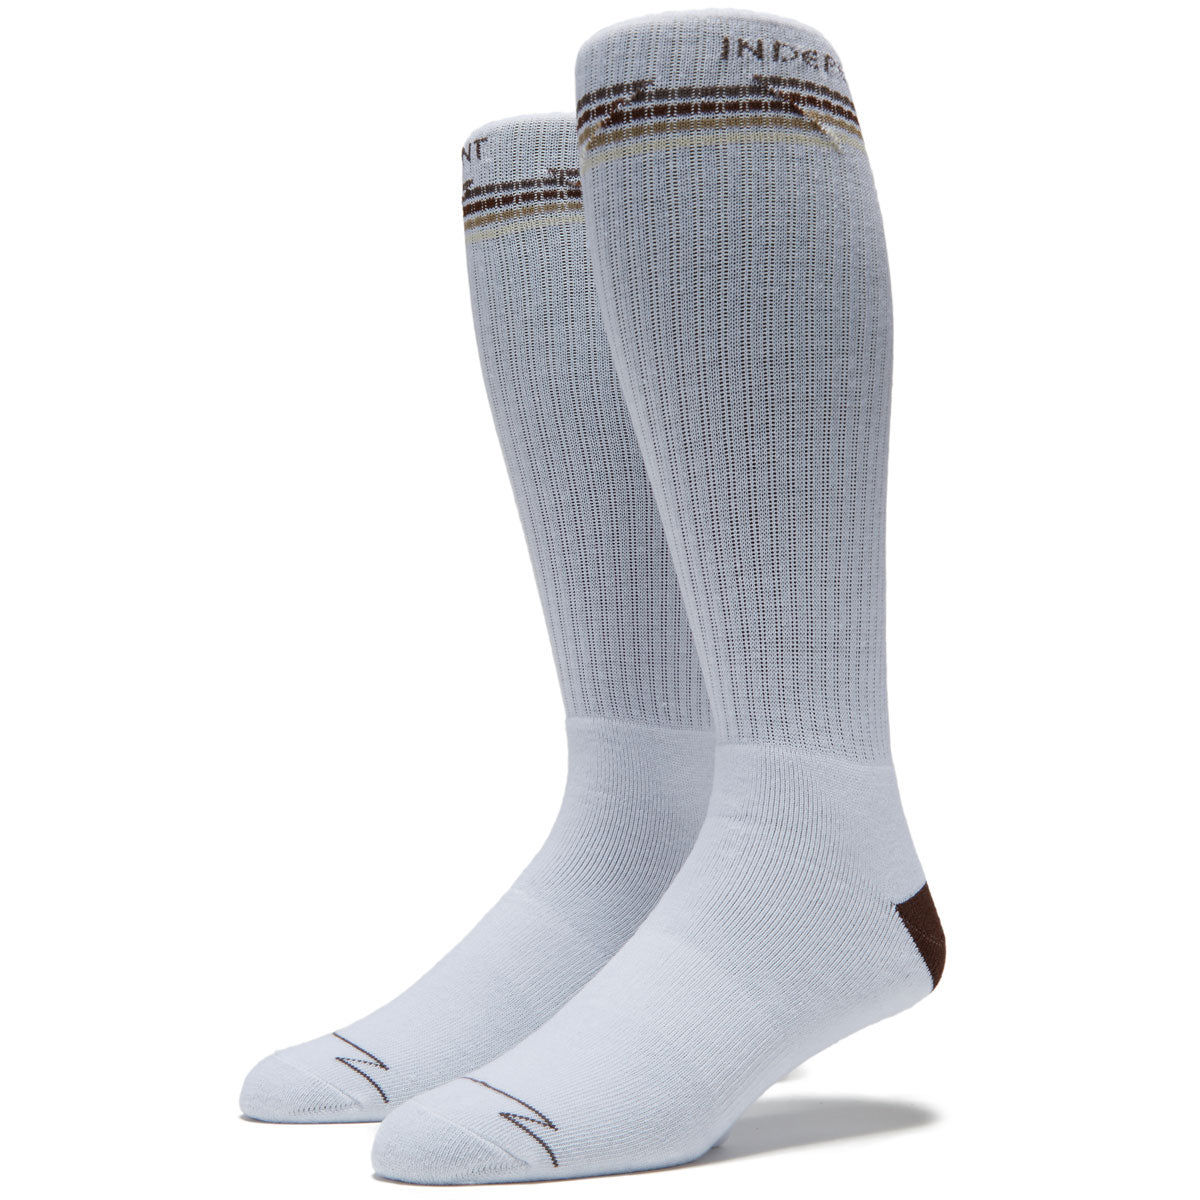 Independent Wired Mid Crew Socks - White image 1